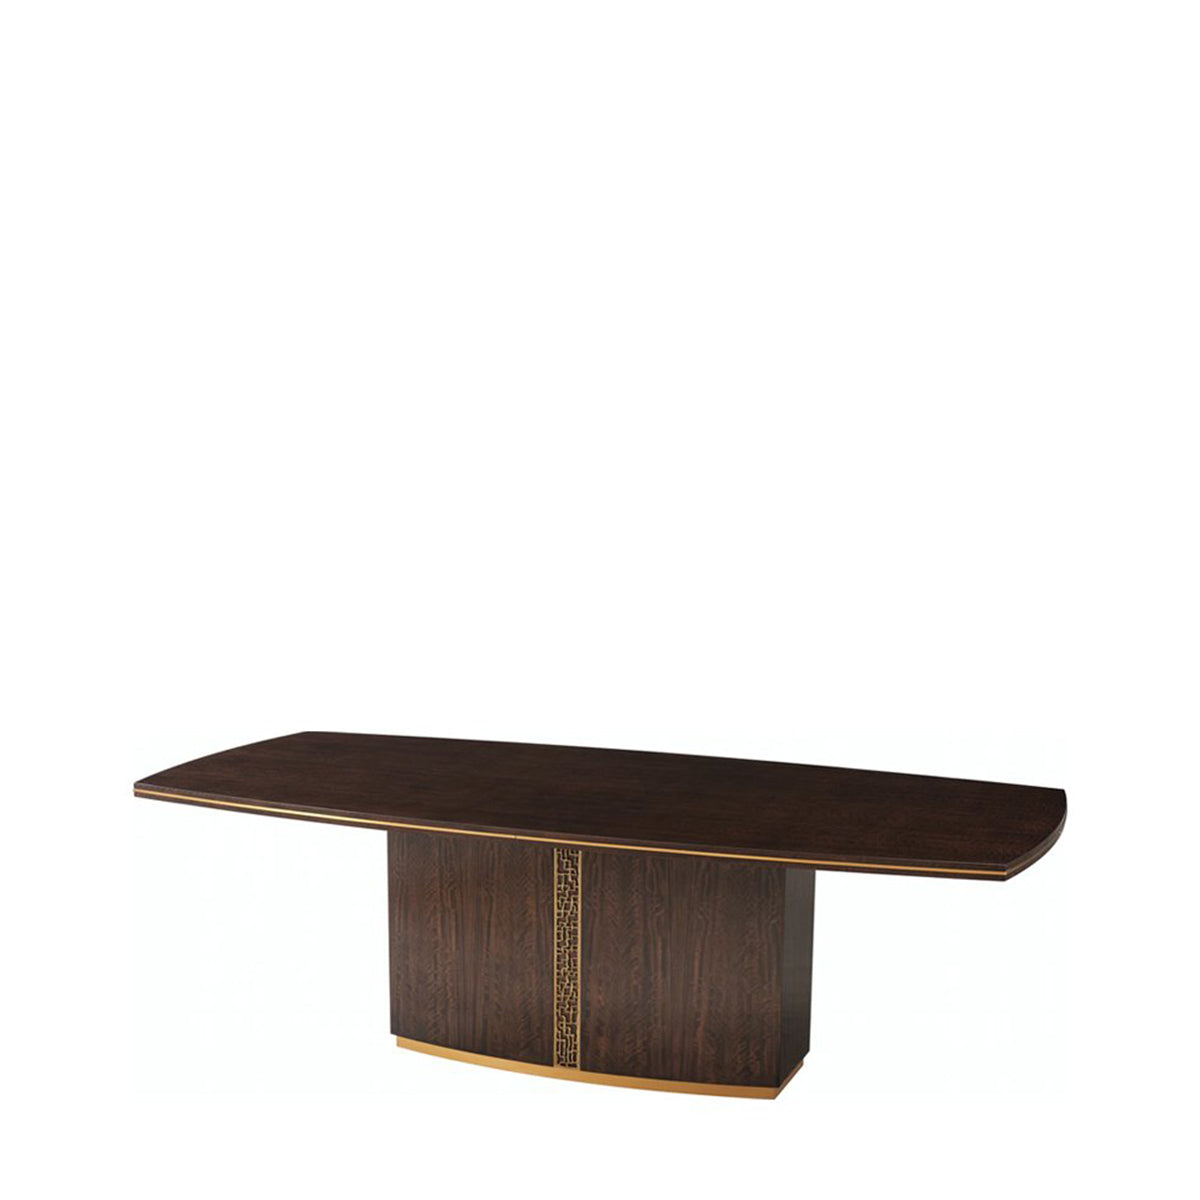 FRENZY DINING TABLE II